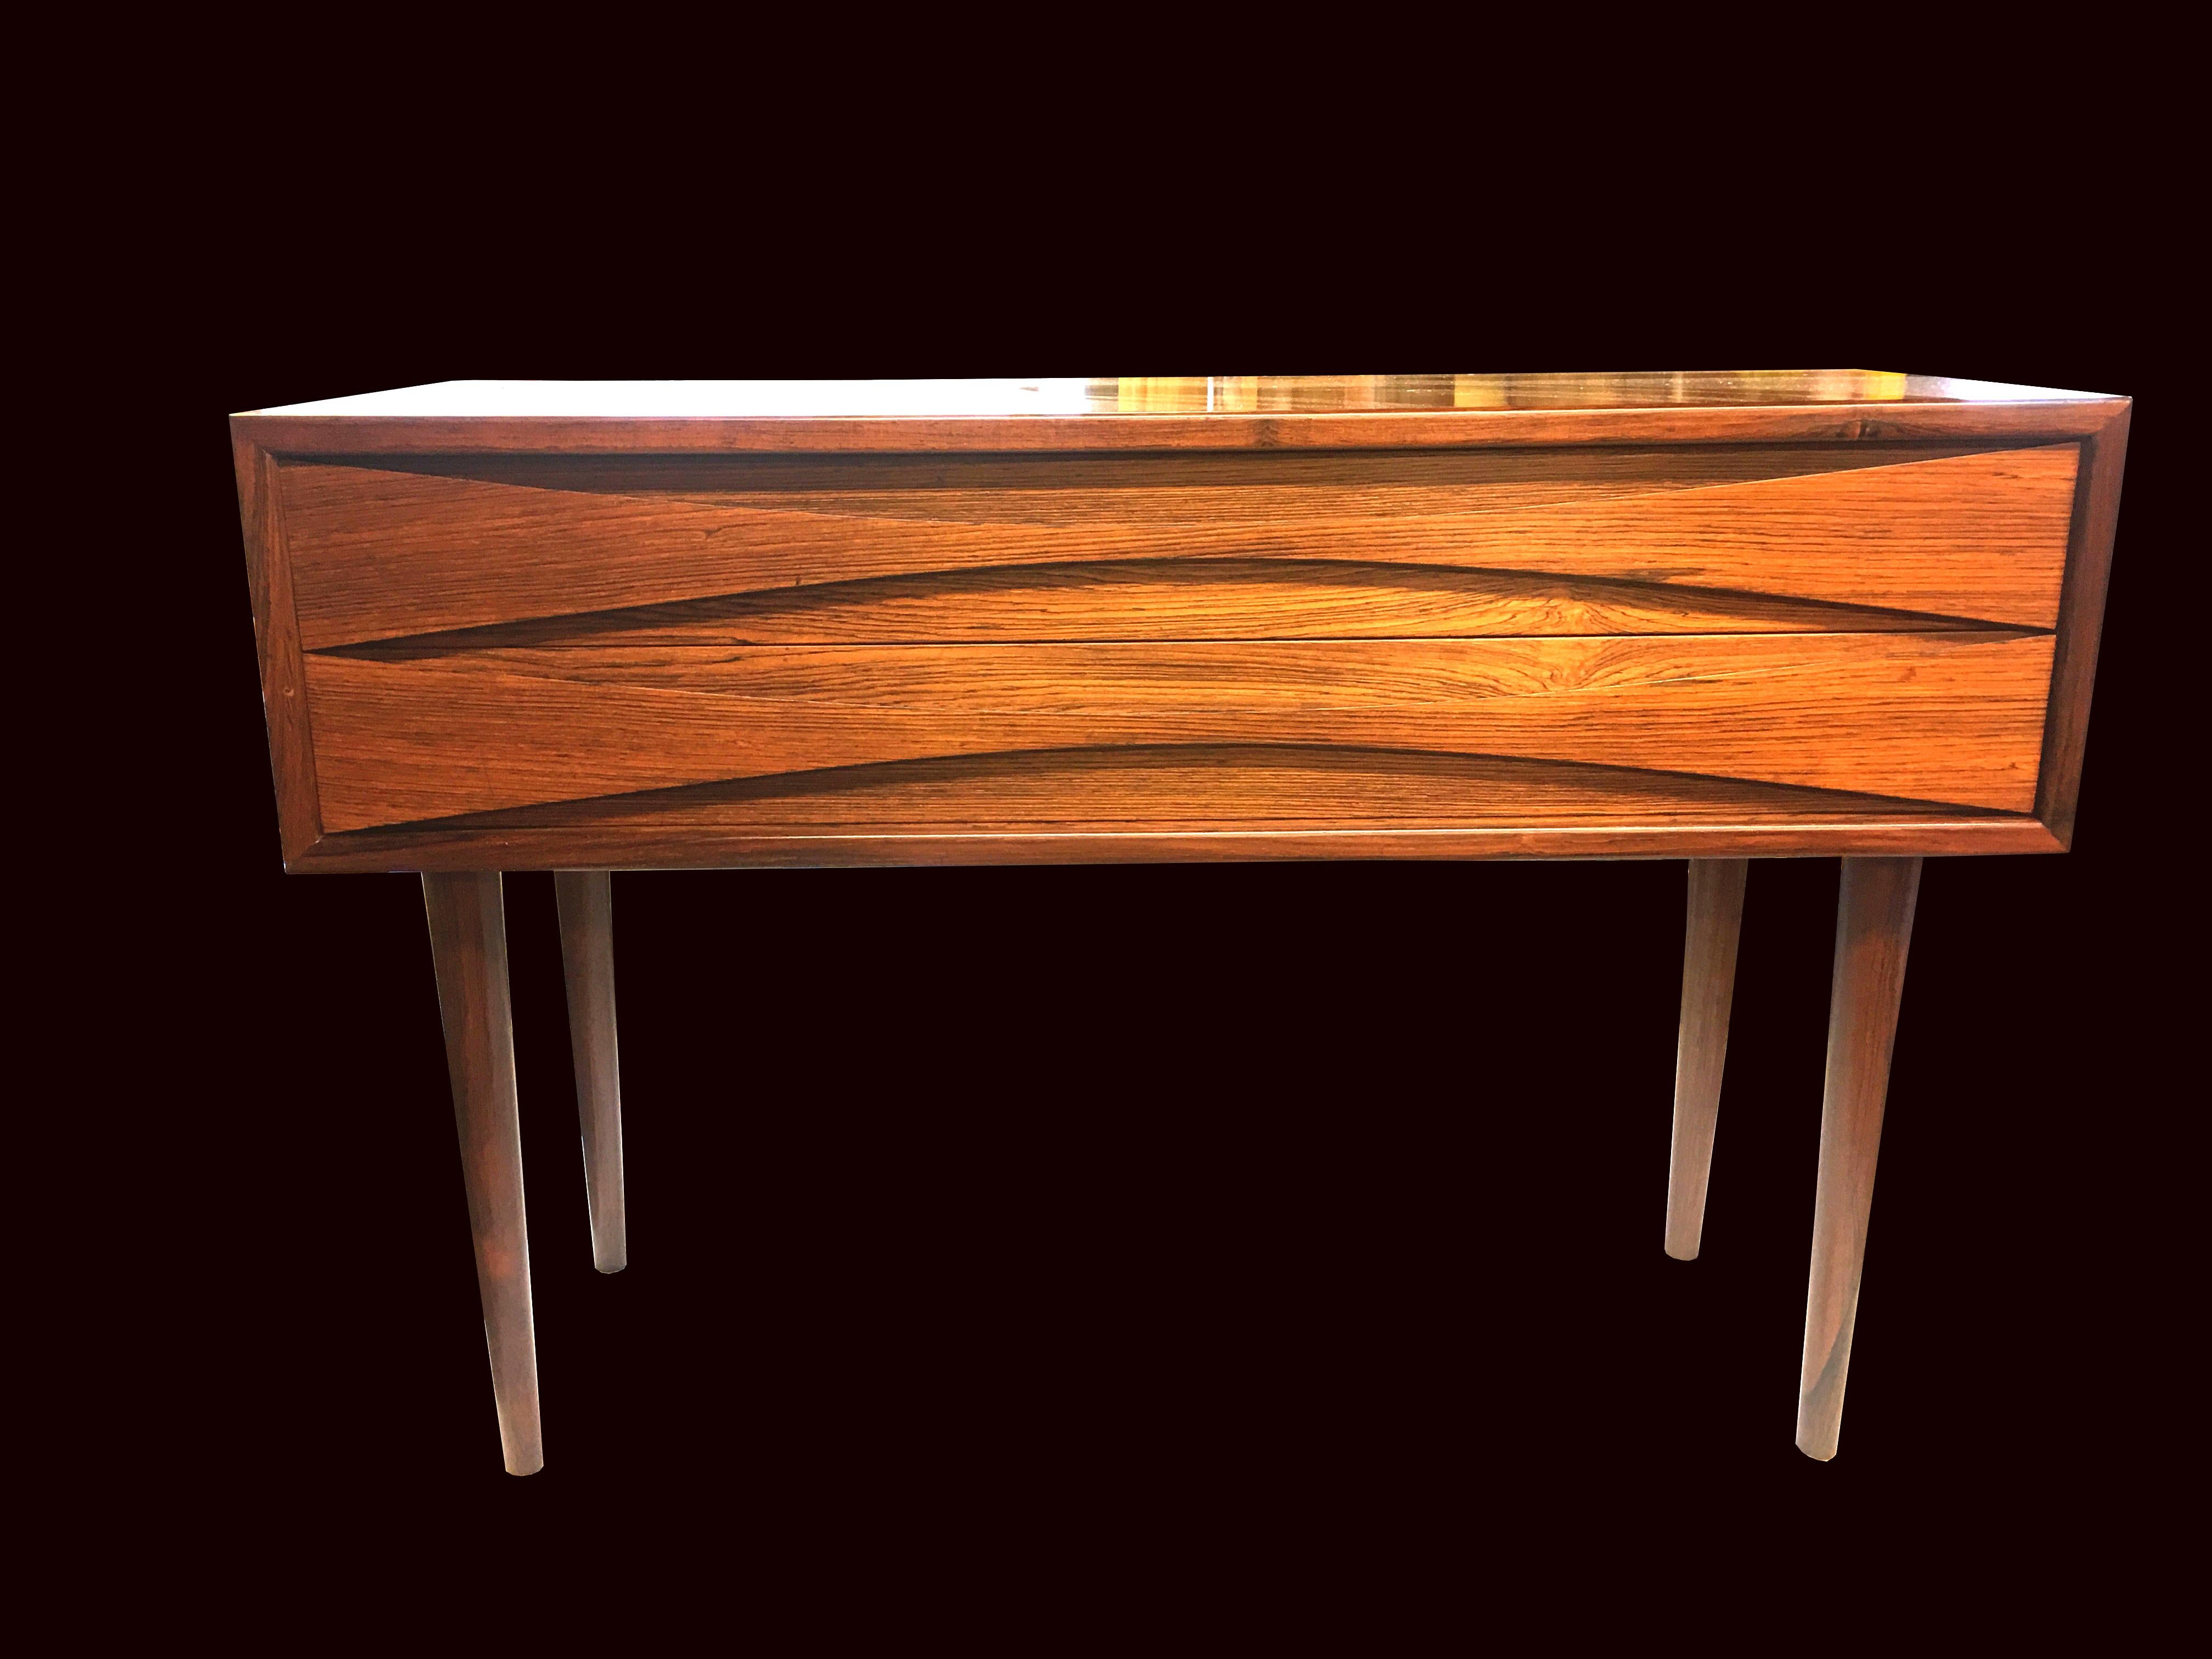 Another great design from Arne Vodder, a long low cabinet with the distinct 'Vodder' bow tie shaped drawers in very nice condition.